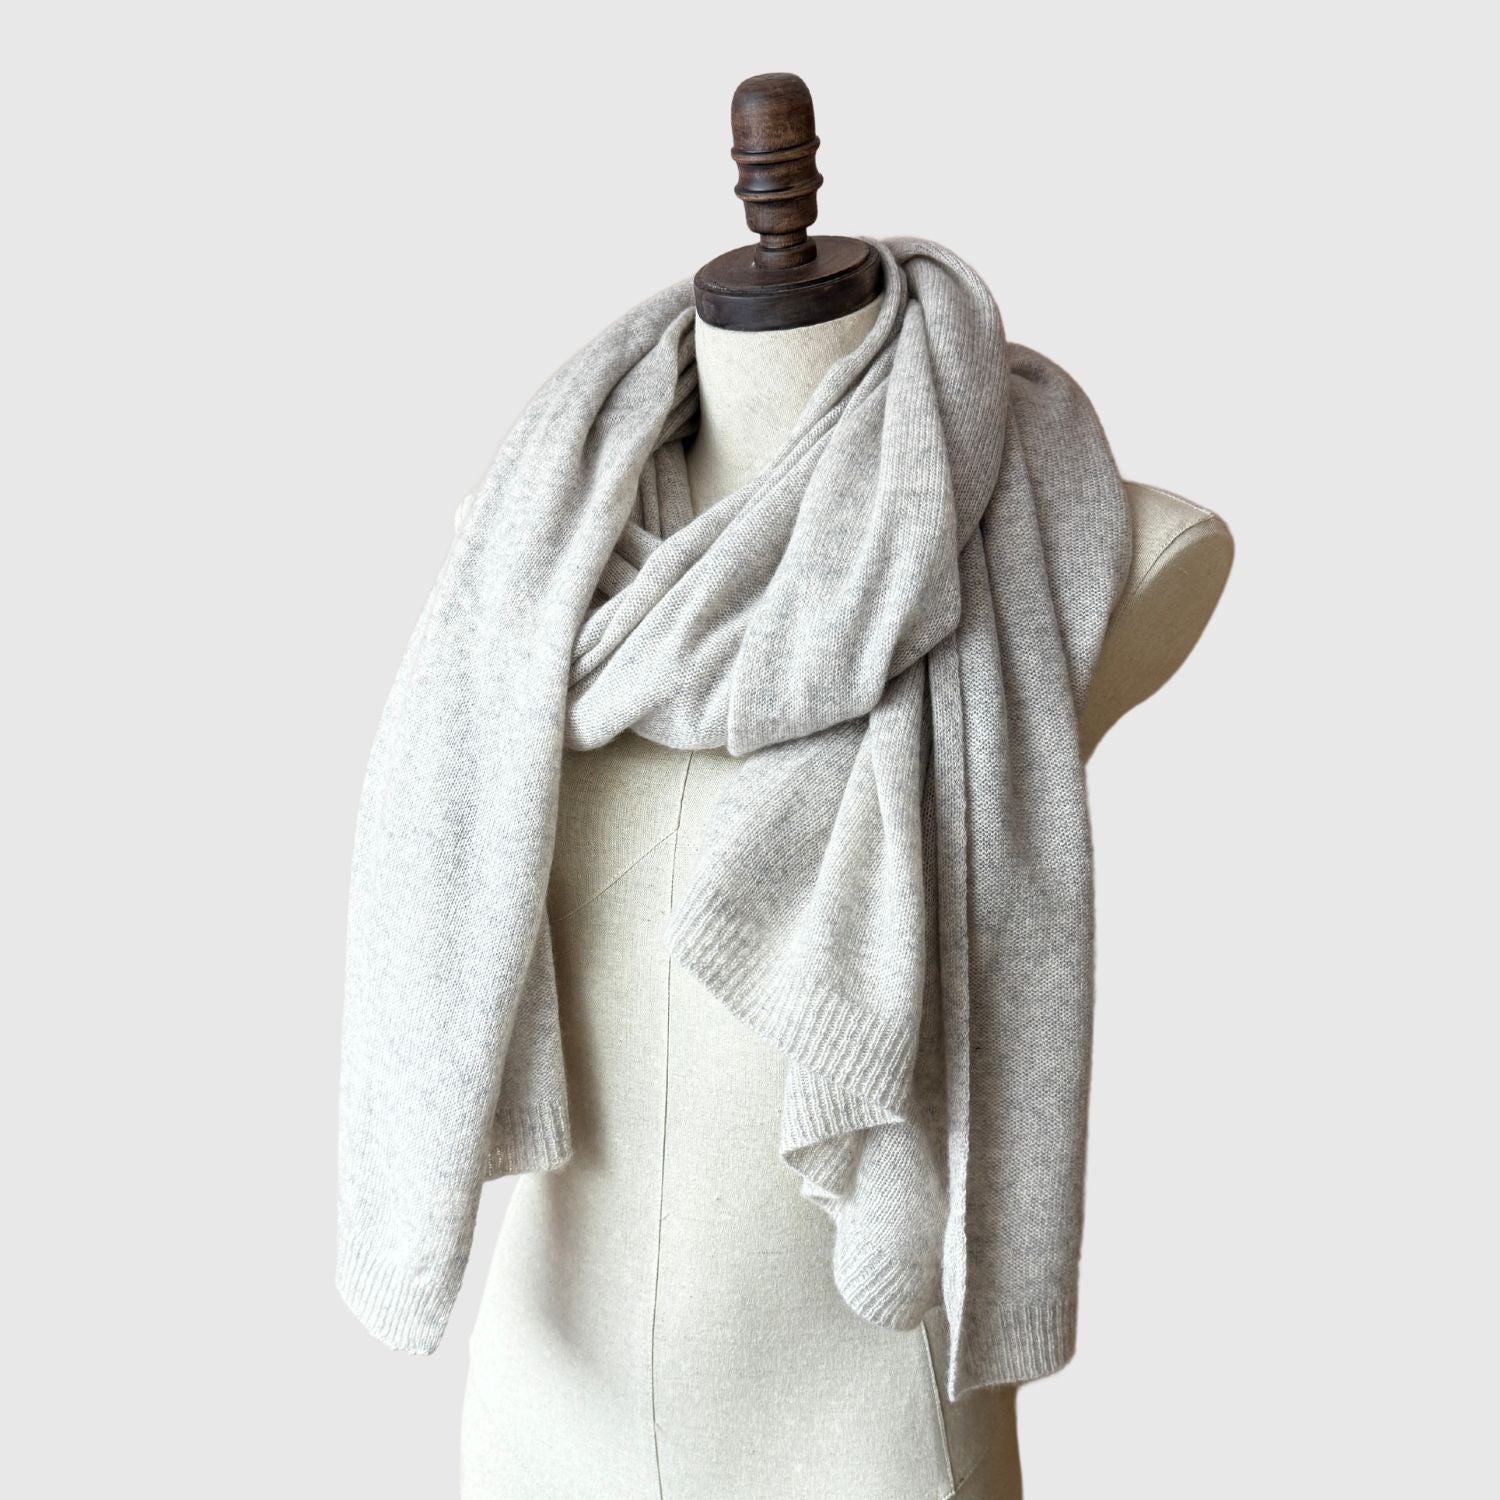 Pearl Gray Cashmere Scarf Women. 100 Percent Pure Light Gray Long Cashmere  Scarf. Christmas Gift. Organic Shawl, Winter Blanket Scarf -  Canada